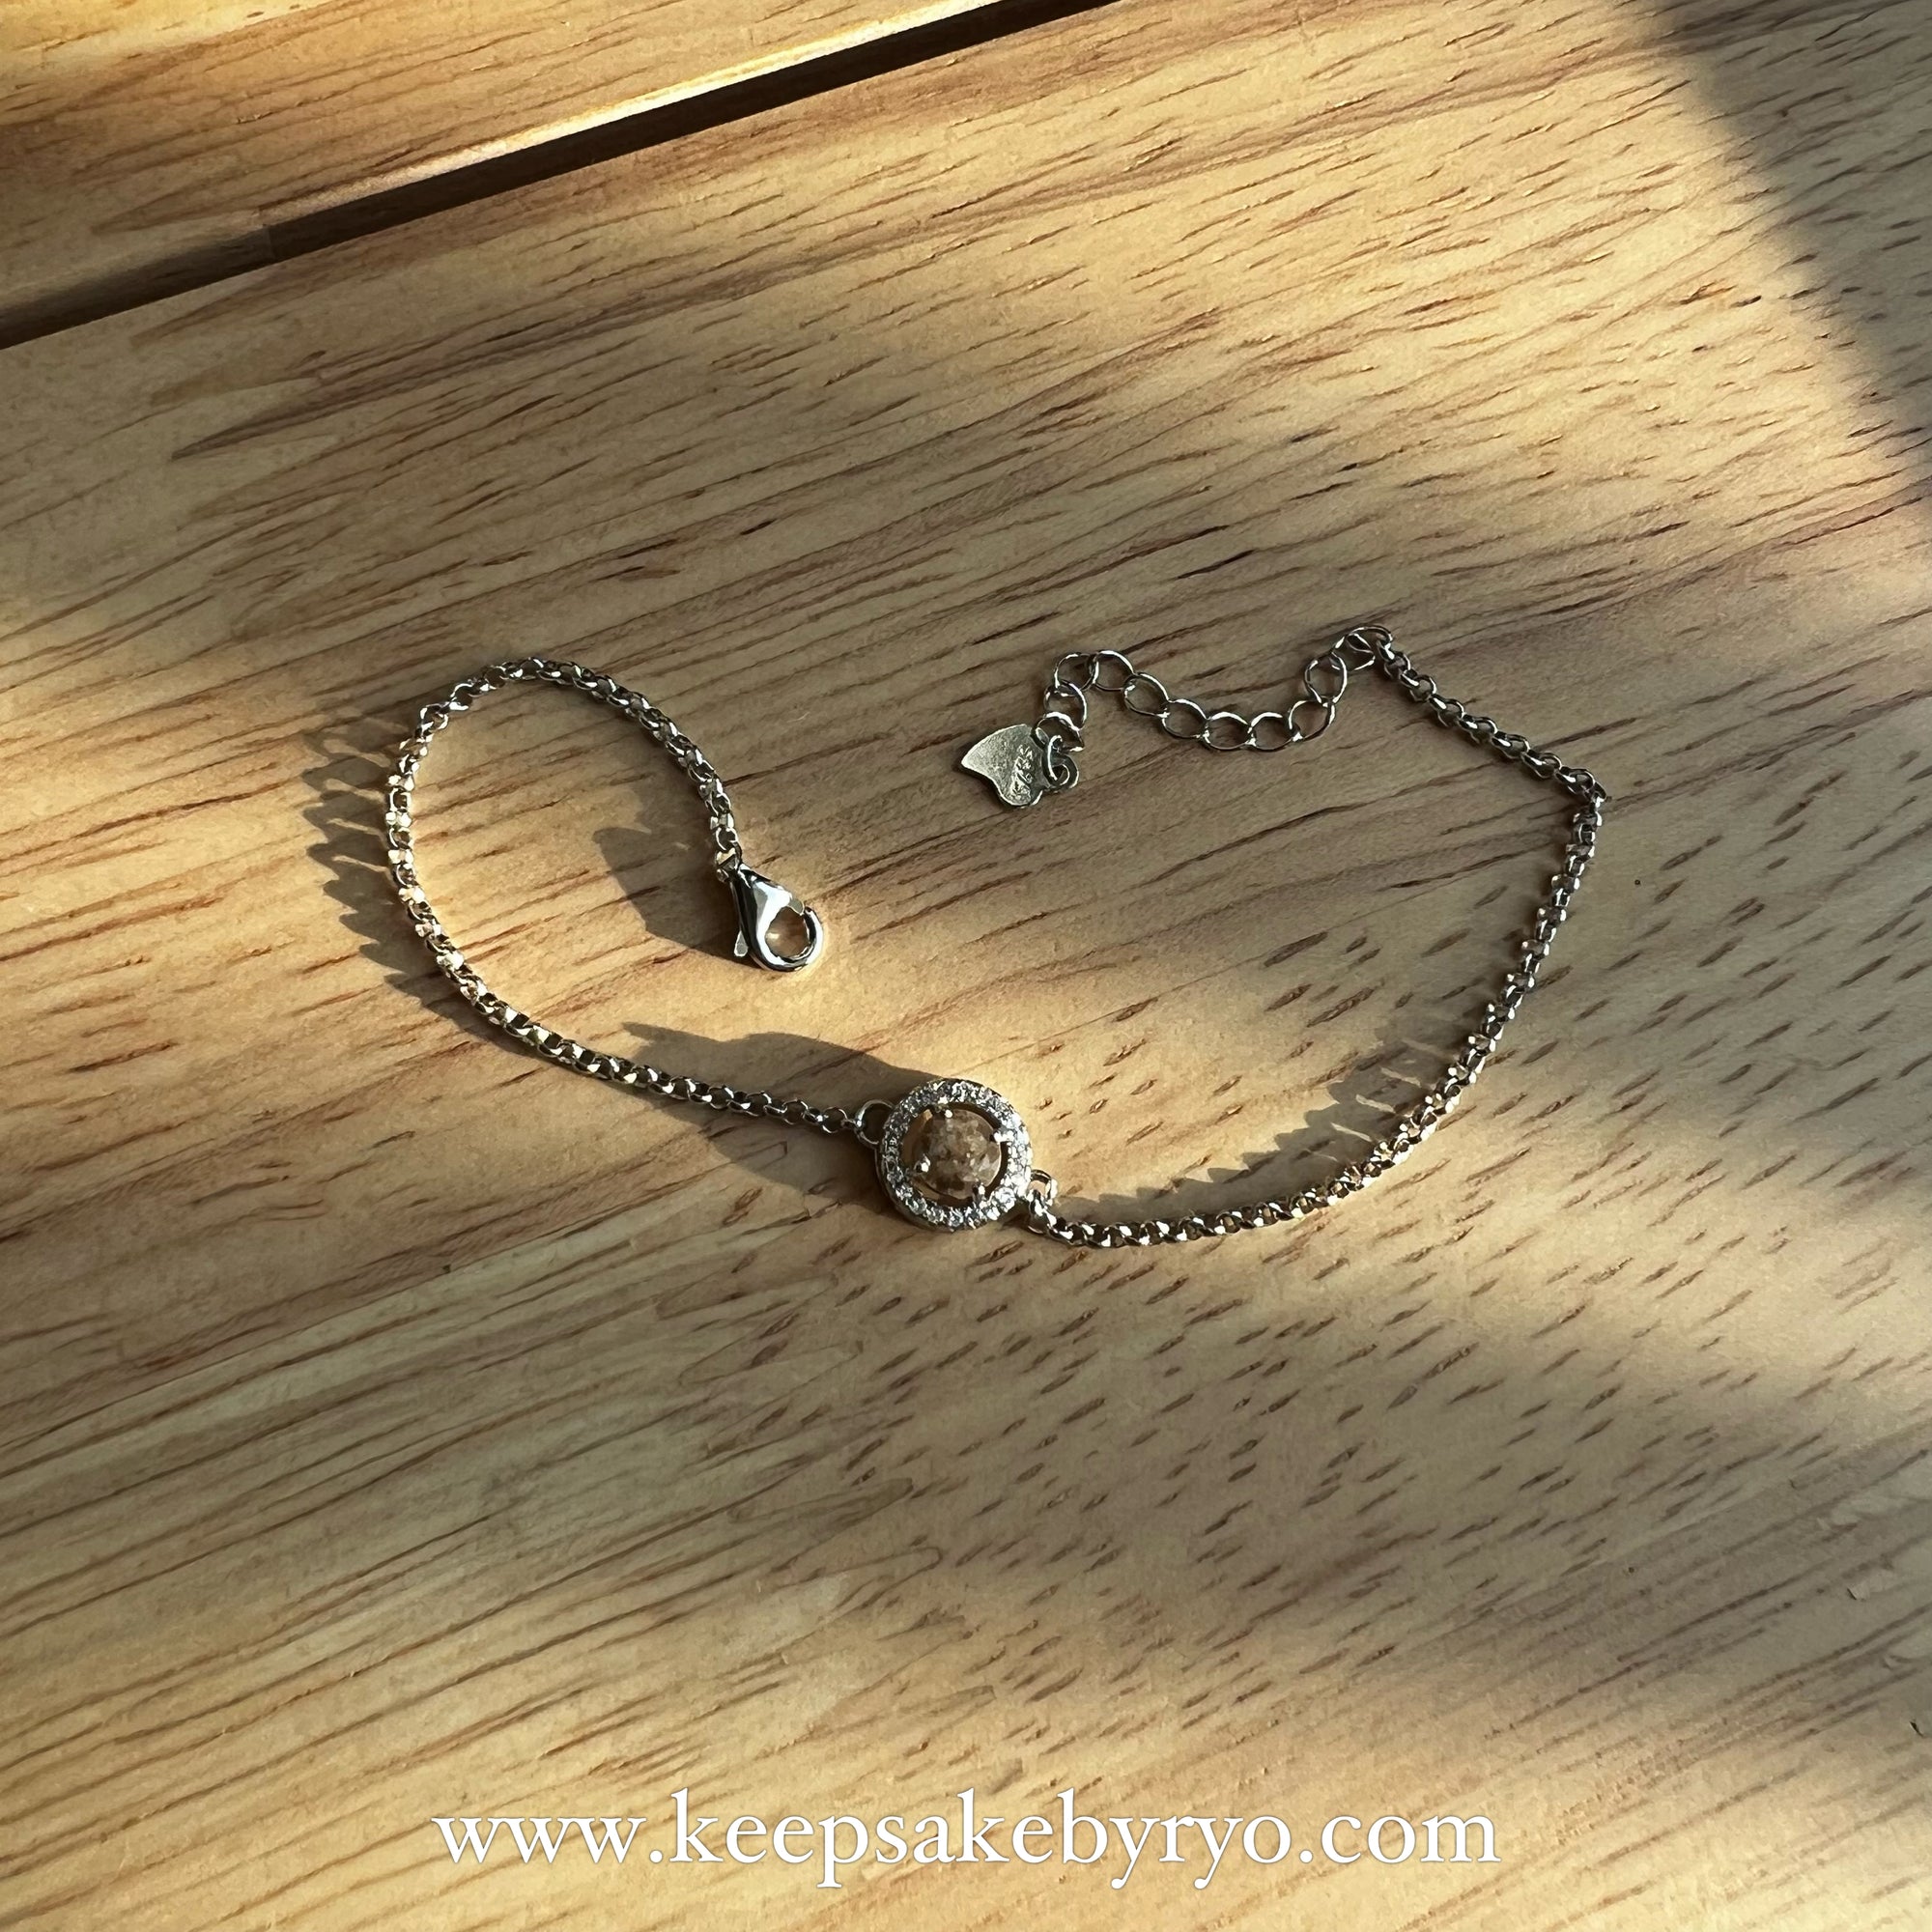 ASHES 925 SOLITAIRE: OLIVIA BRACELET WITH ROUND INCLUSION STONE